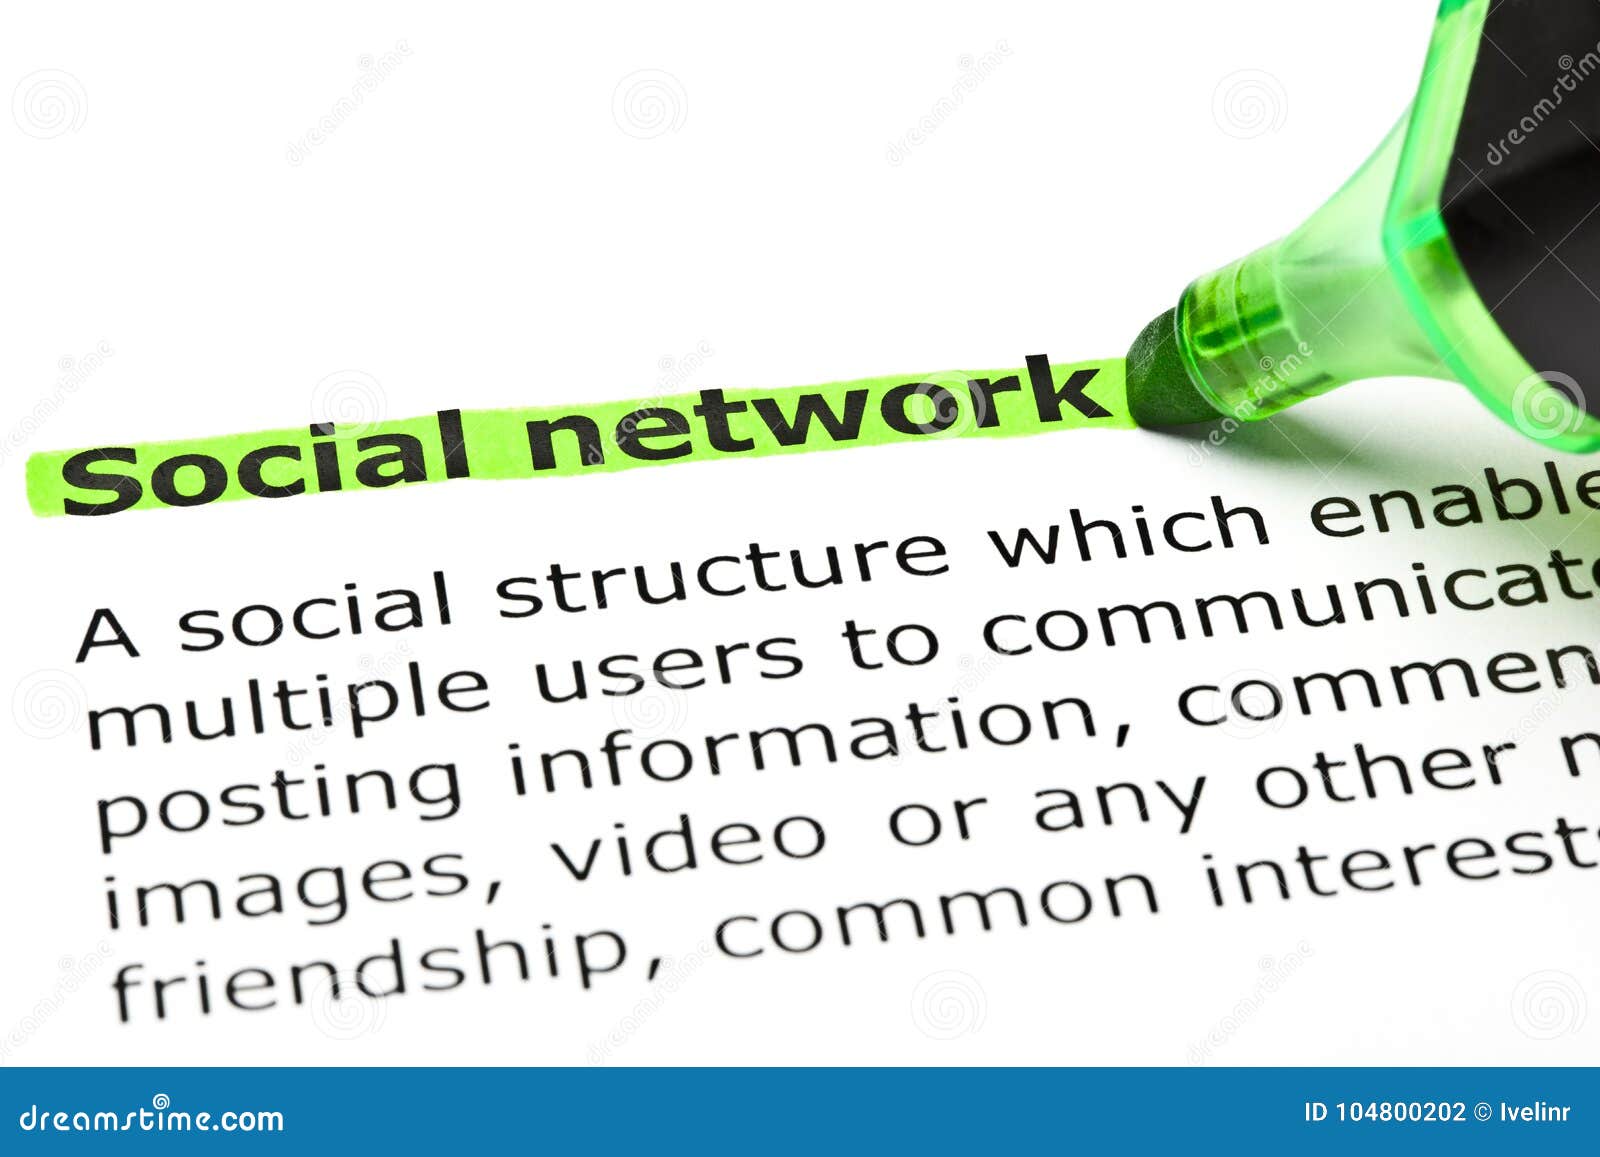 social network dictionary definition green marker stock photo